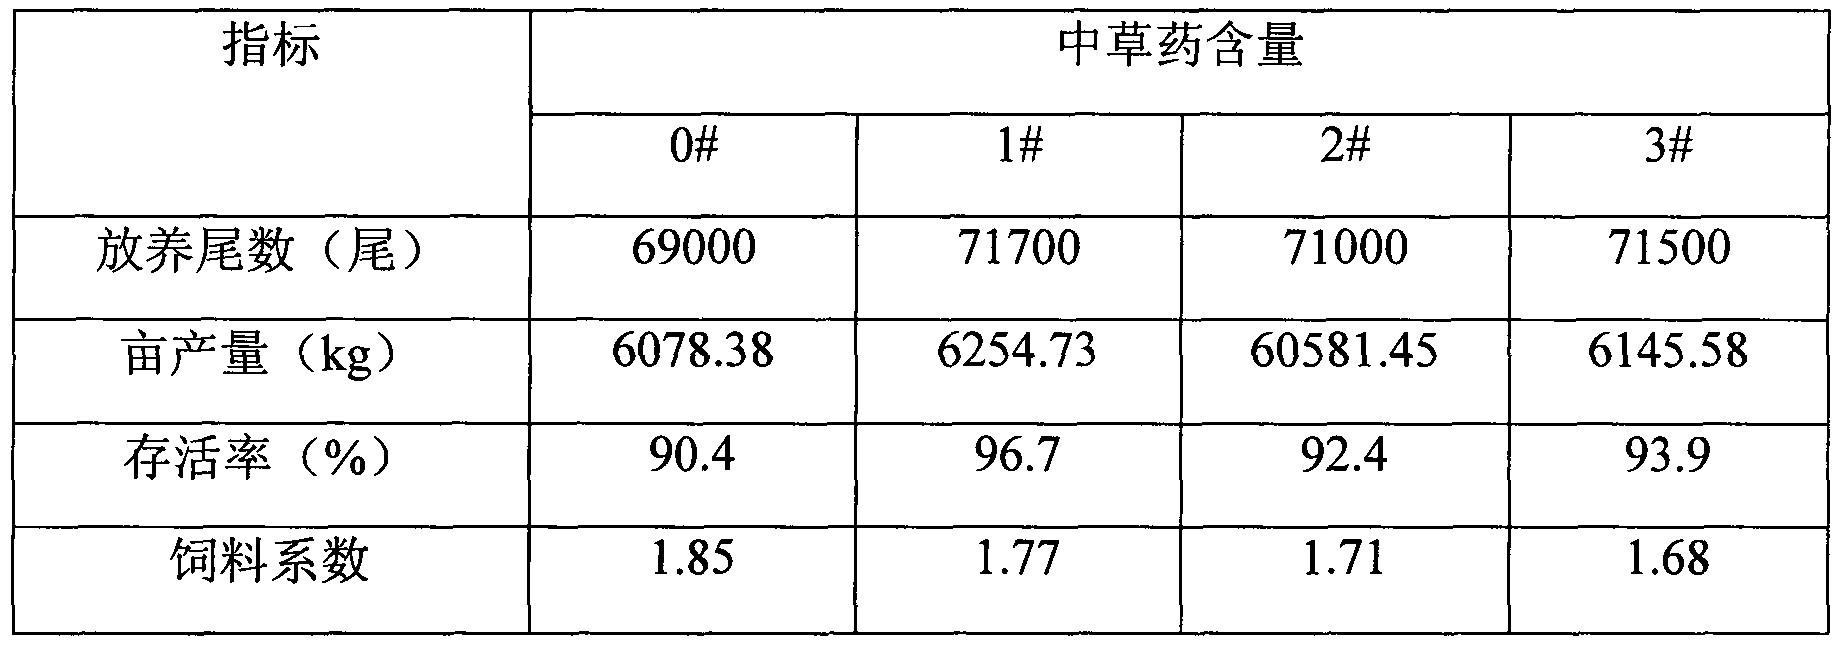 Environmentally-friendly snakehead fish feed containing Chinese herbal medicinal components, and preparation method thereof